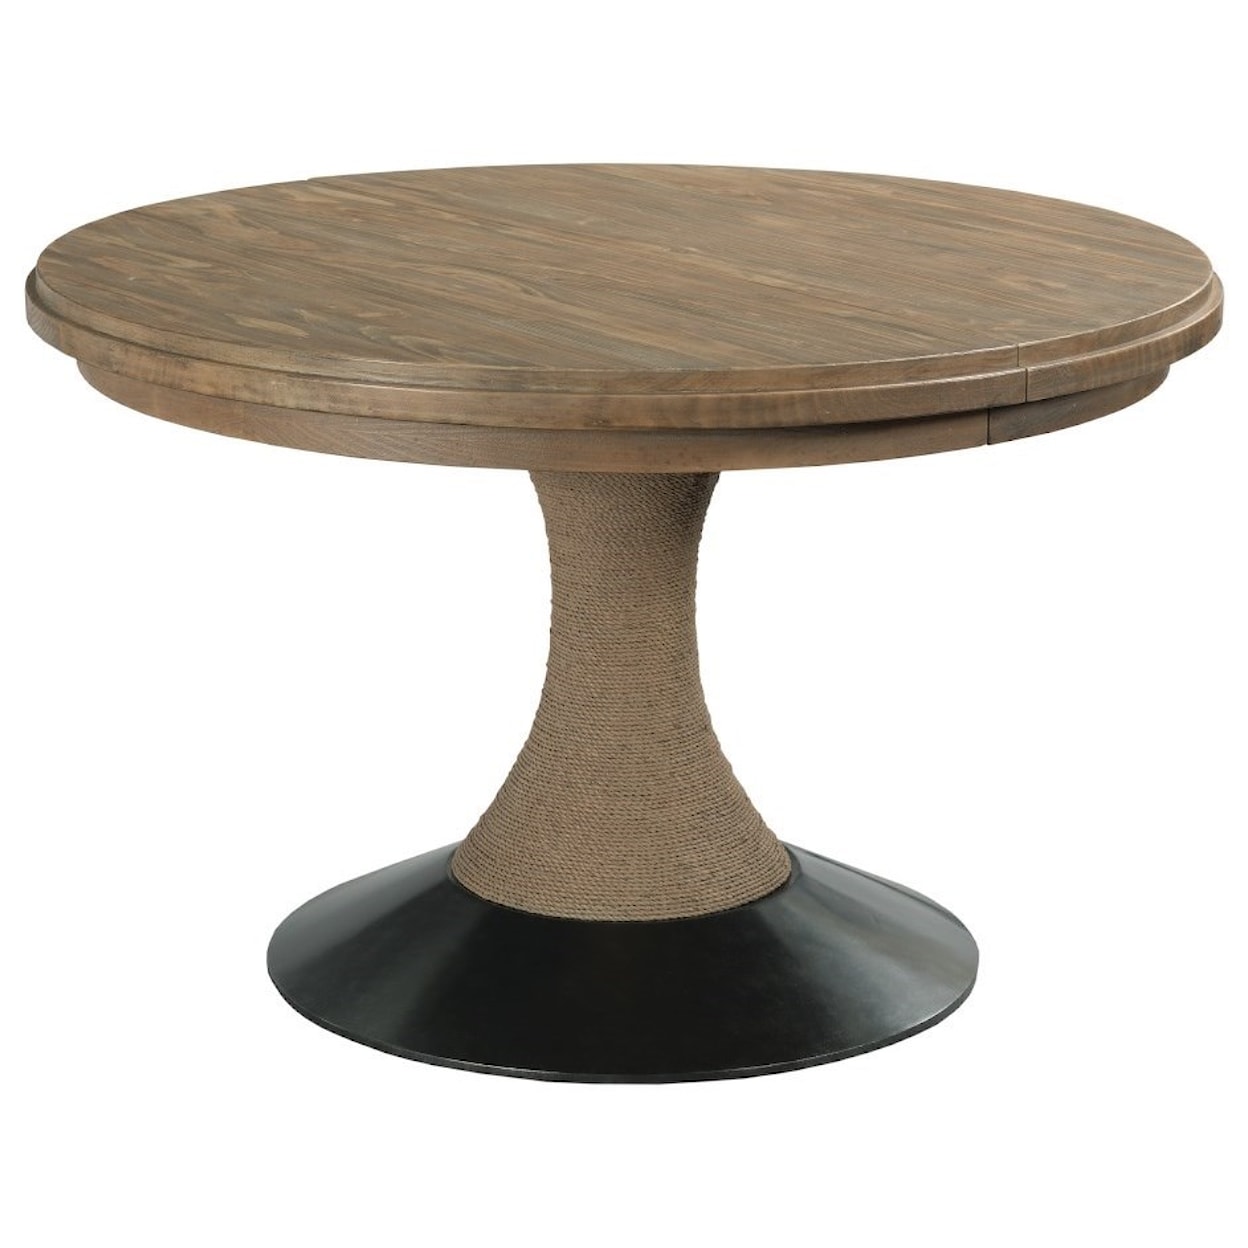 Kincaid Furniture Modern Forge Lindale Round Dining Table